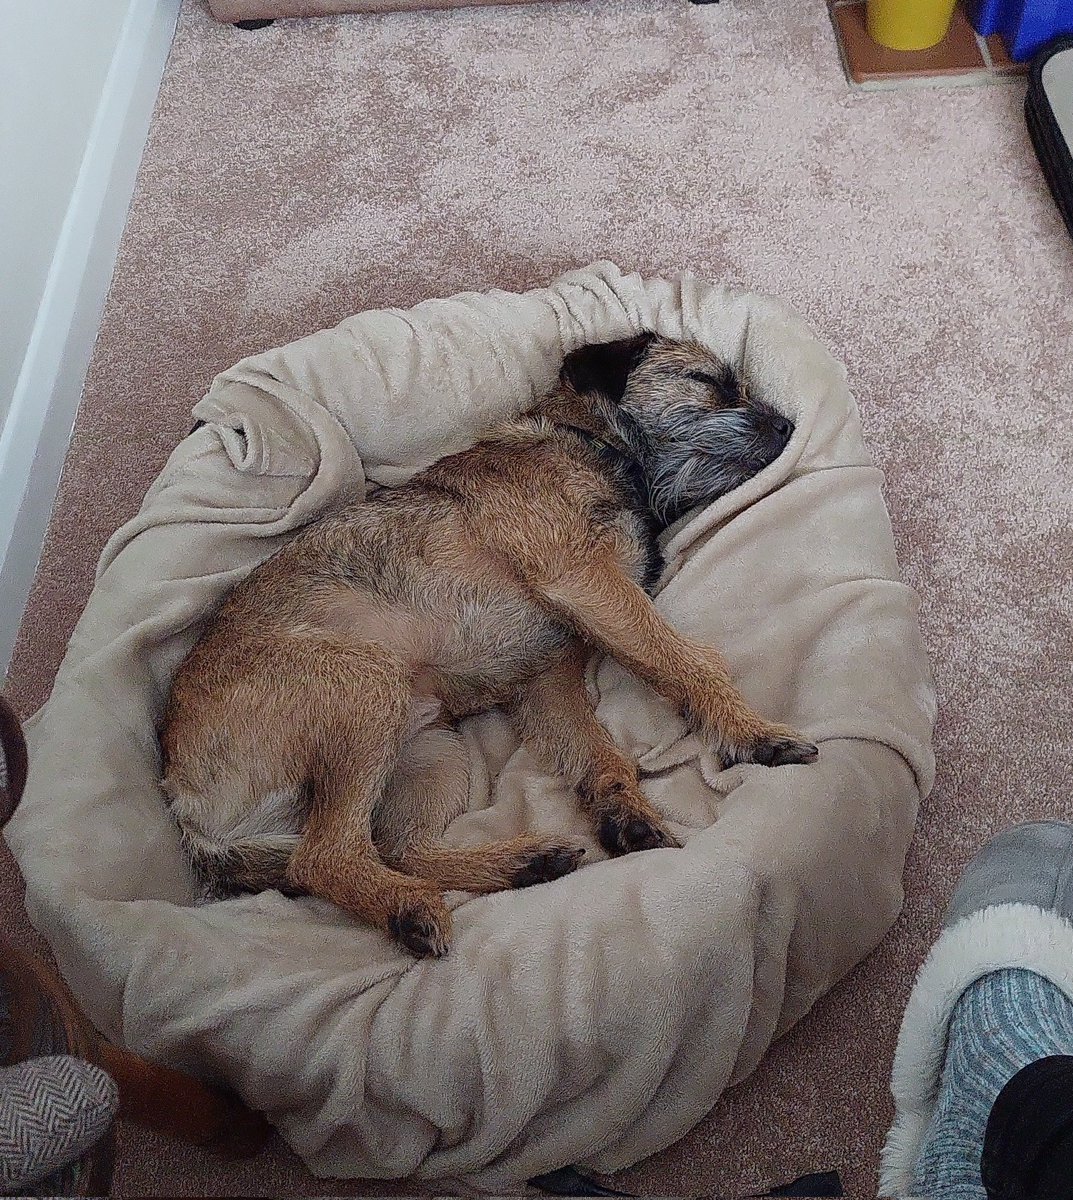 You'd never guess but I was scared of this bed a few weeks ago and refused to go in it 🤣🐕 #stubborn #BTPosse